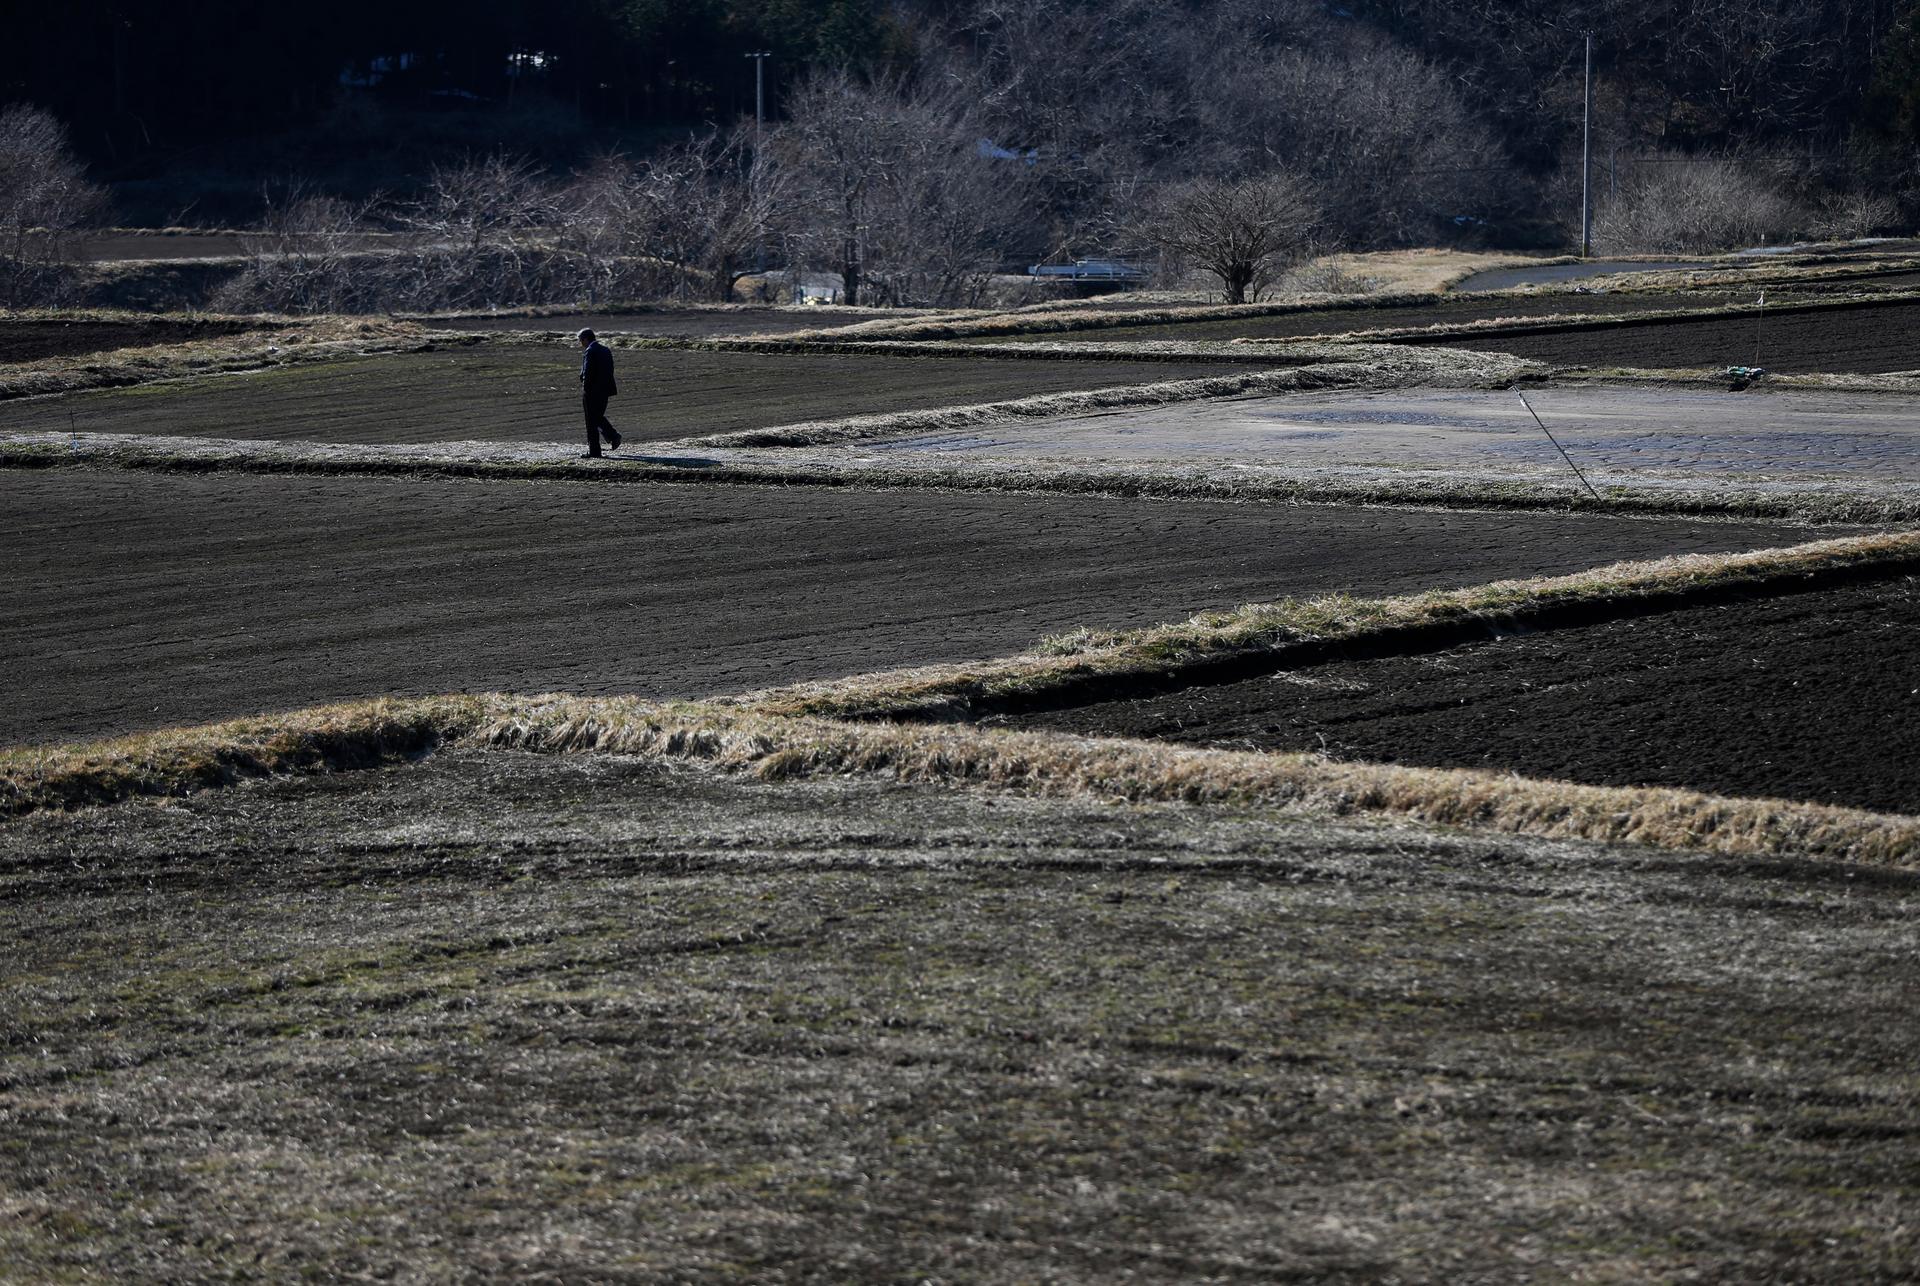 A man walks between a fallow rice field at Miyakoji area in Tamura, Fukushima prefecture on April 1, 2014. The area was finally opened to residents three years after the Fukushima Daiichi nuclear disaster.